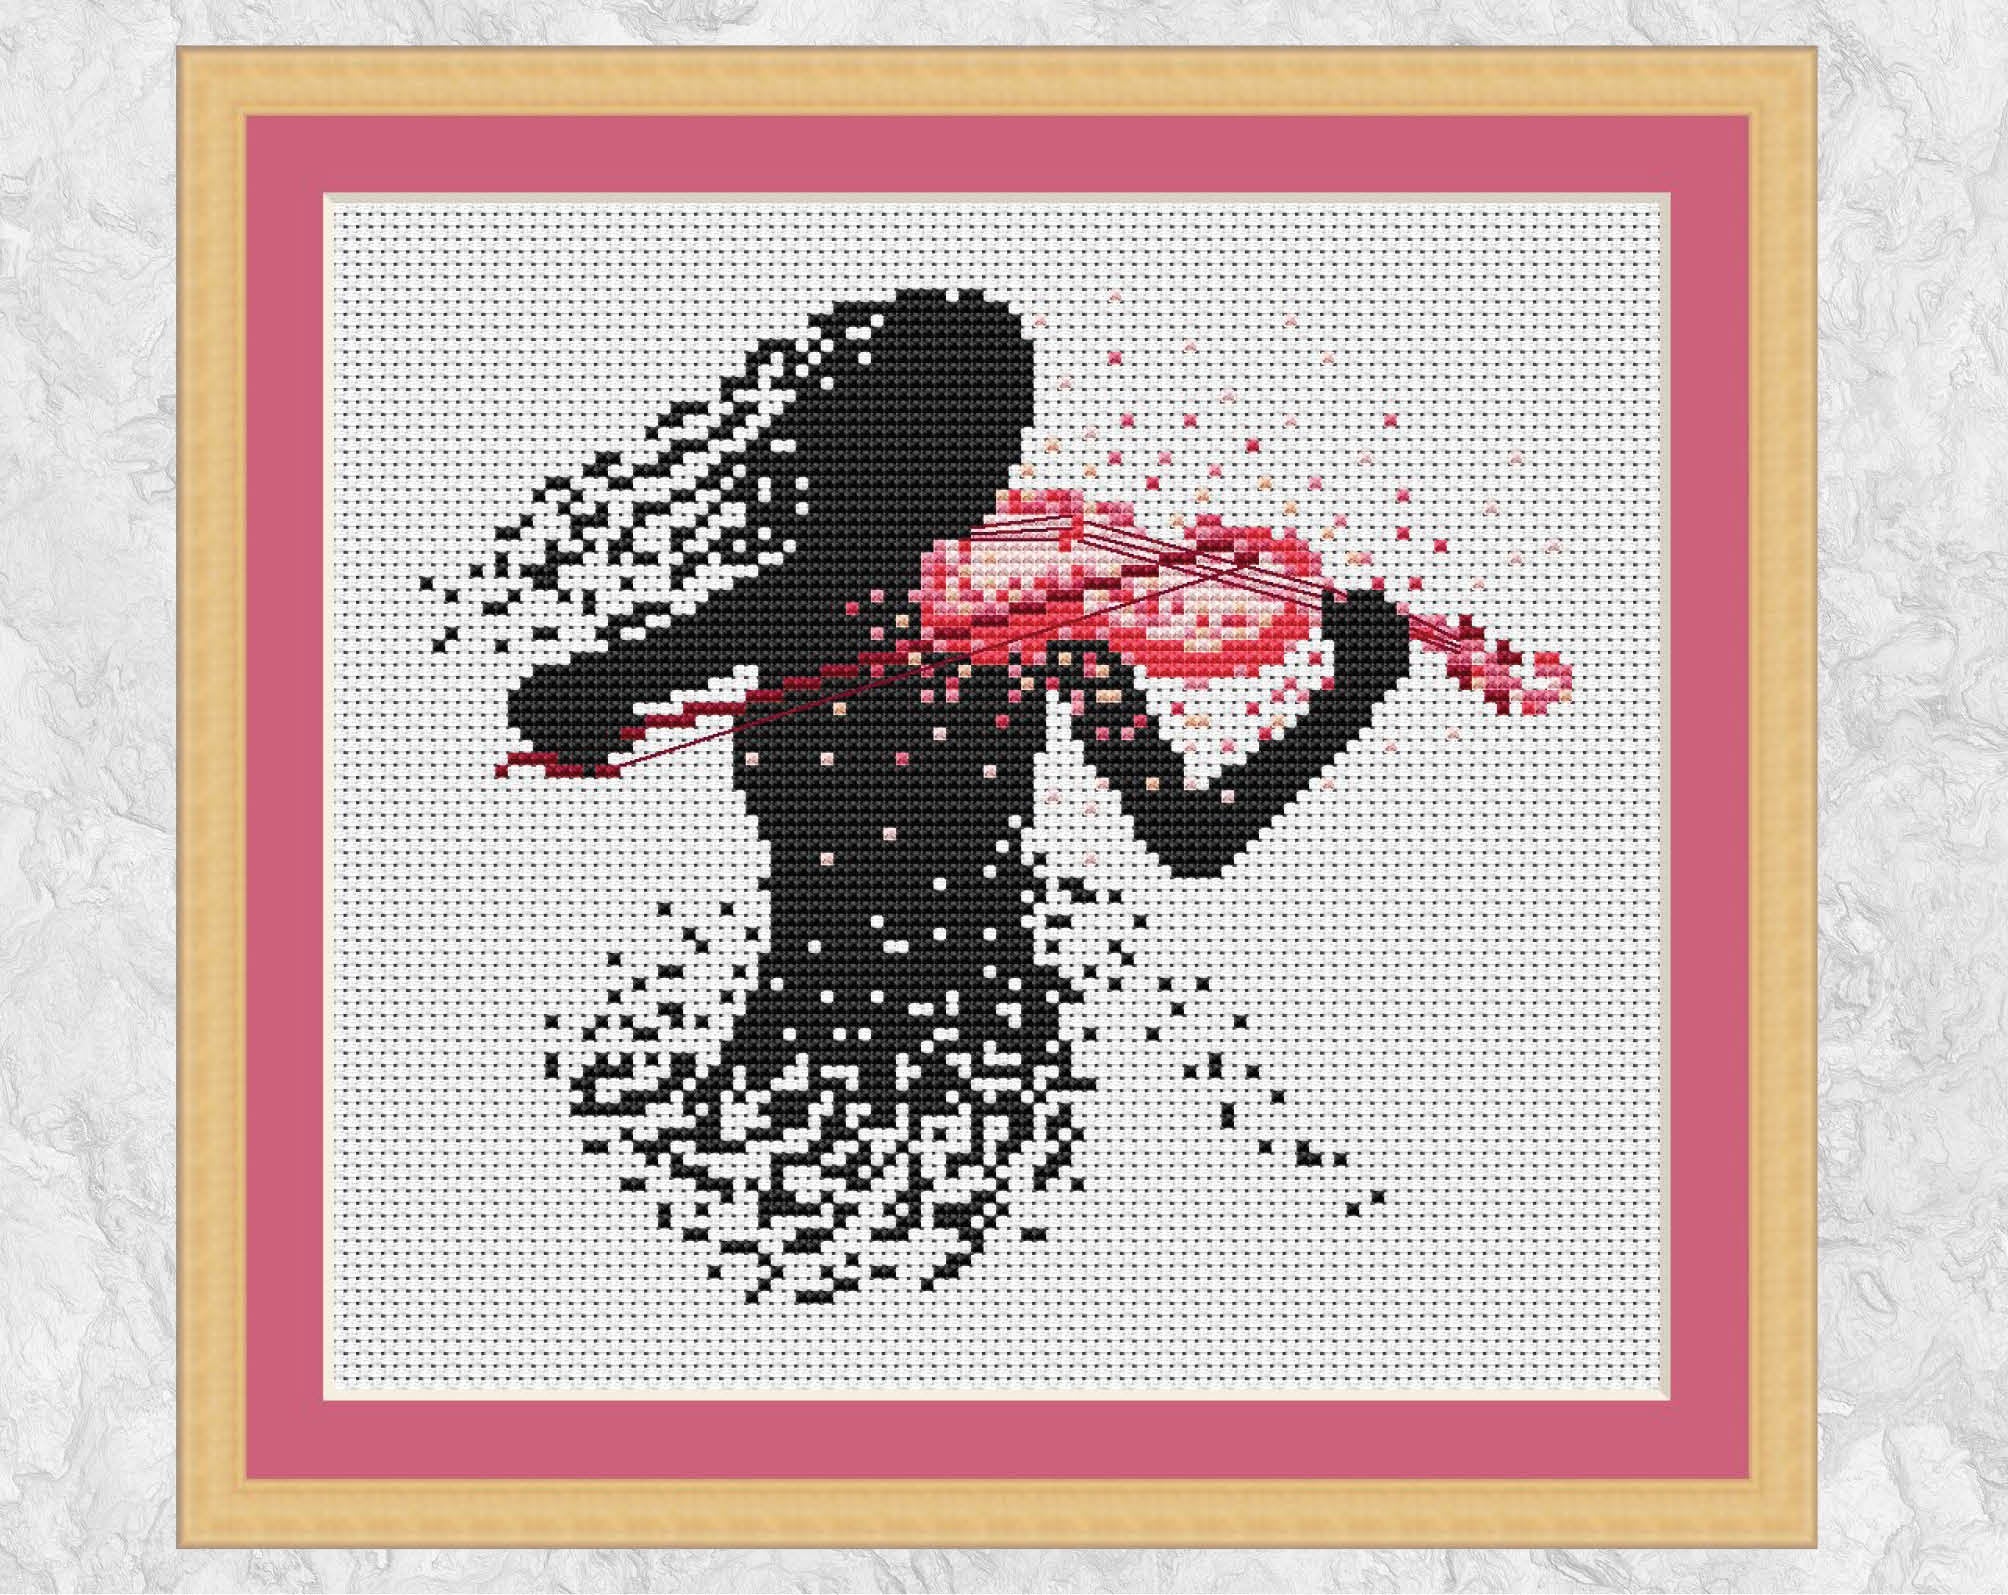 Modern art cross stitch pattern of a female violin player. Shown with frame.